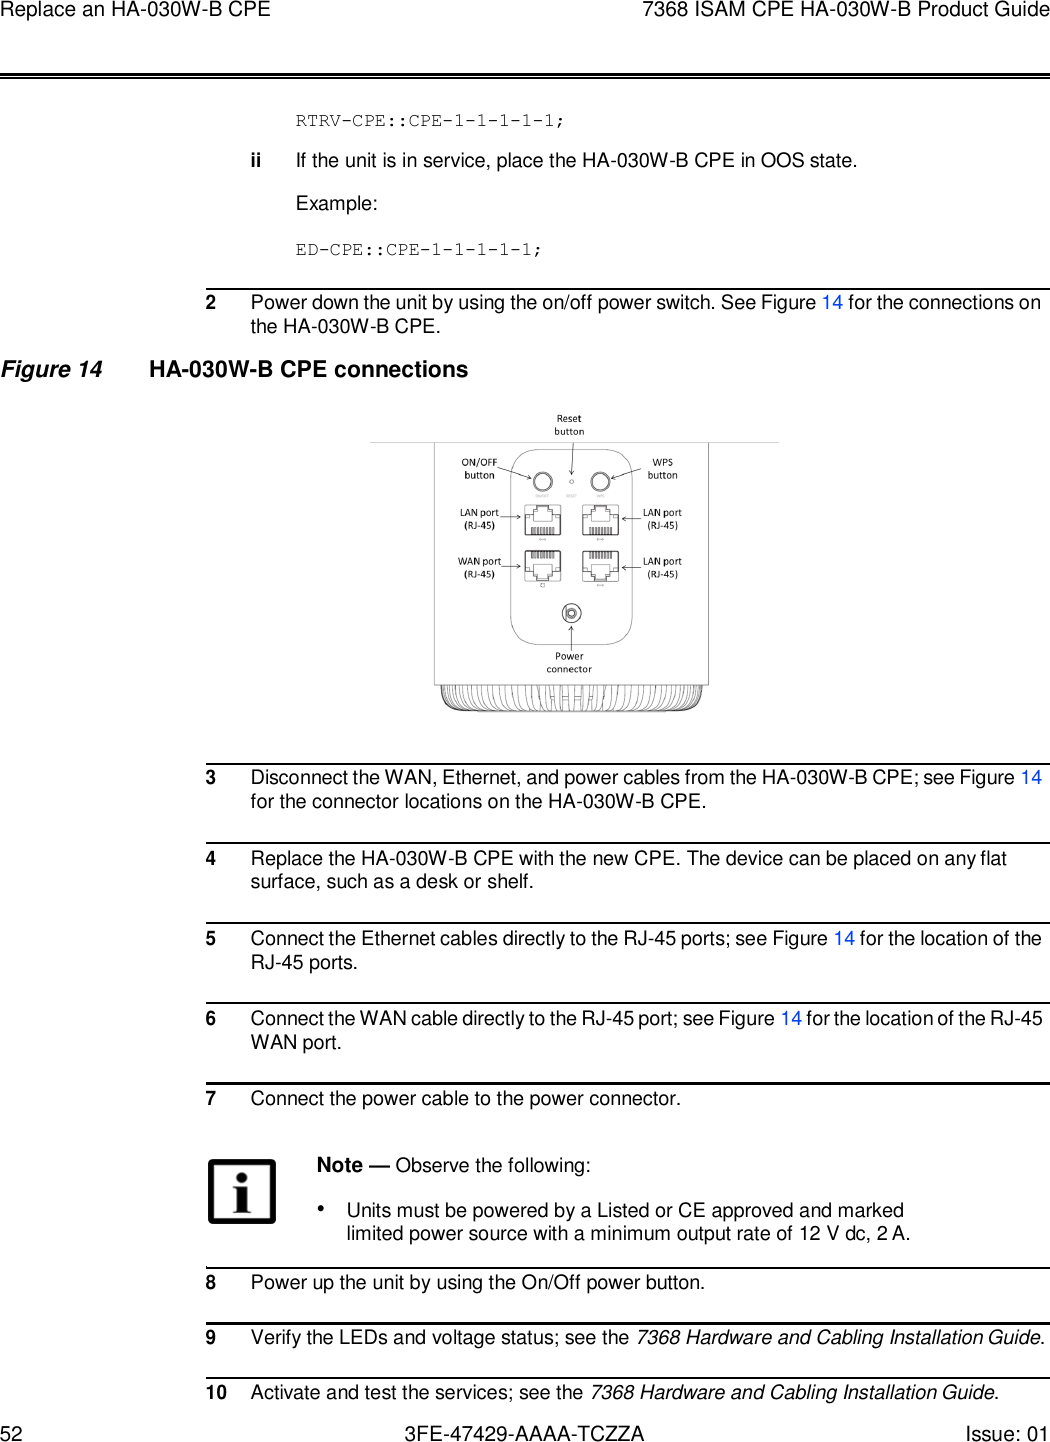 Page 52 of Nokia Bell HA030WB 7368 Intelligent Services Access Manager CPE User Manual 7368 ISAM CPE HA 020W A Product Guide